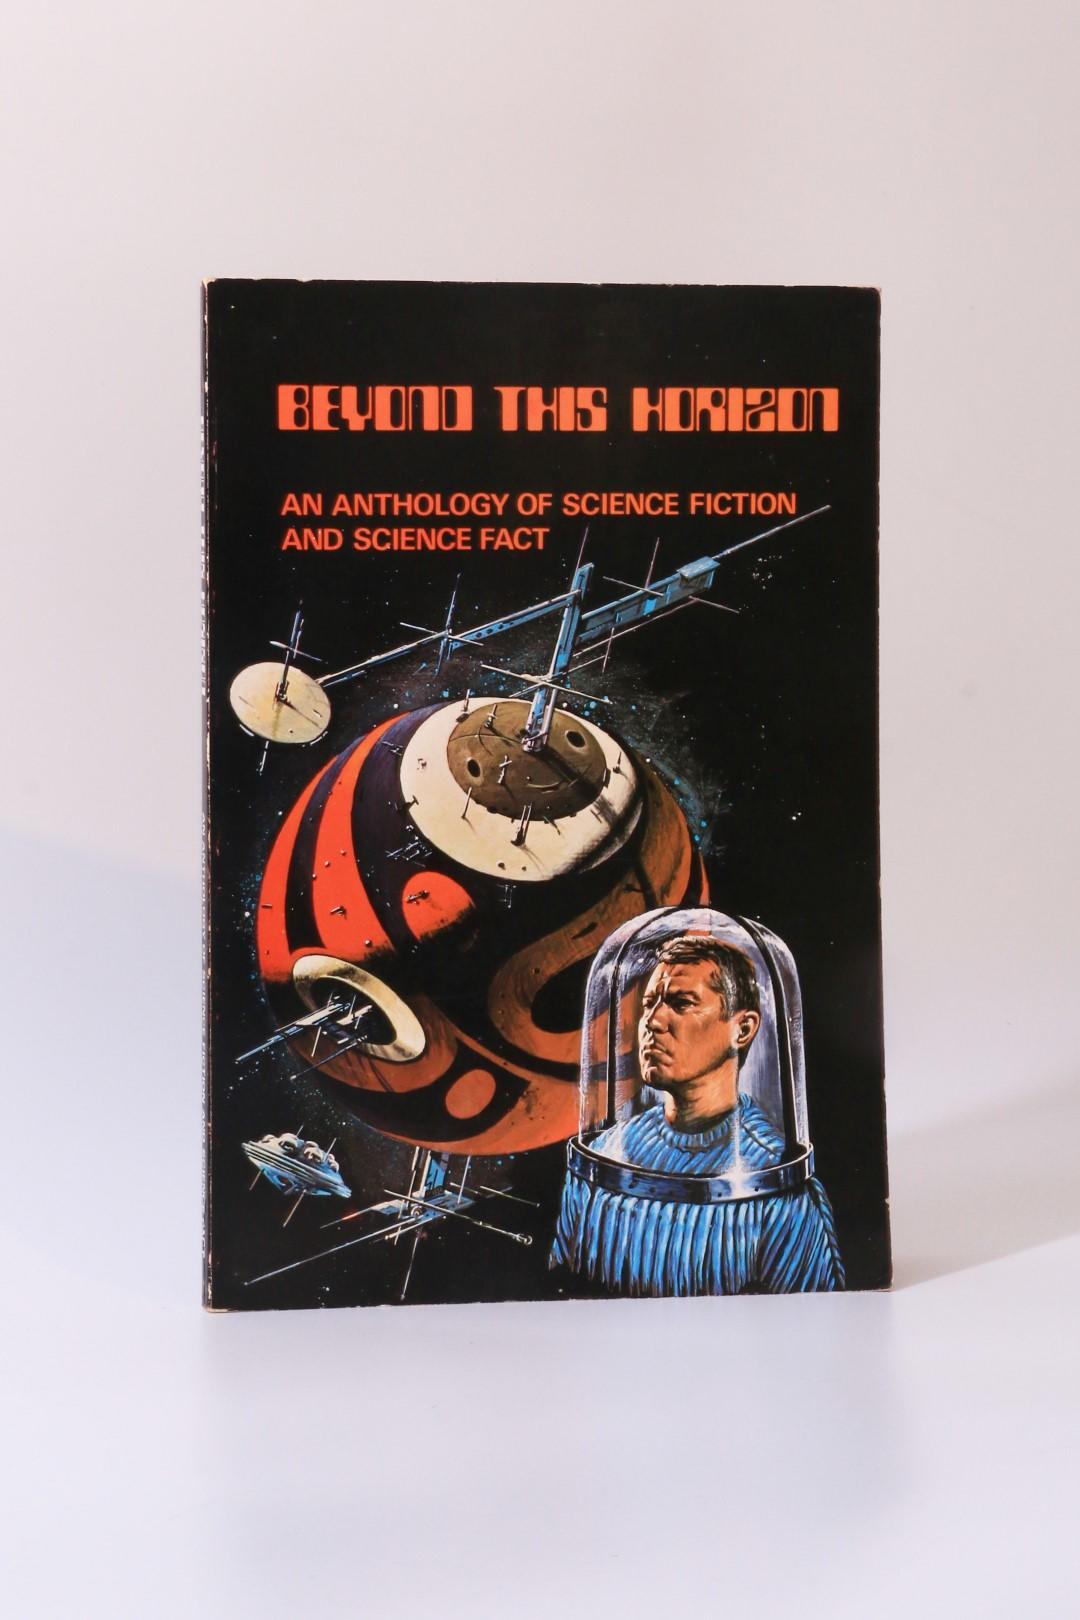 Christopher Carroll - Beyond this Horizon: An Anthology of Science Fiction and Science Fact - Ceolfrith Press, 1973, Signed Limited Edition.